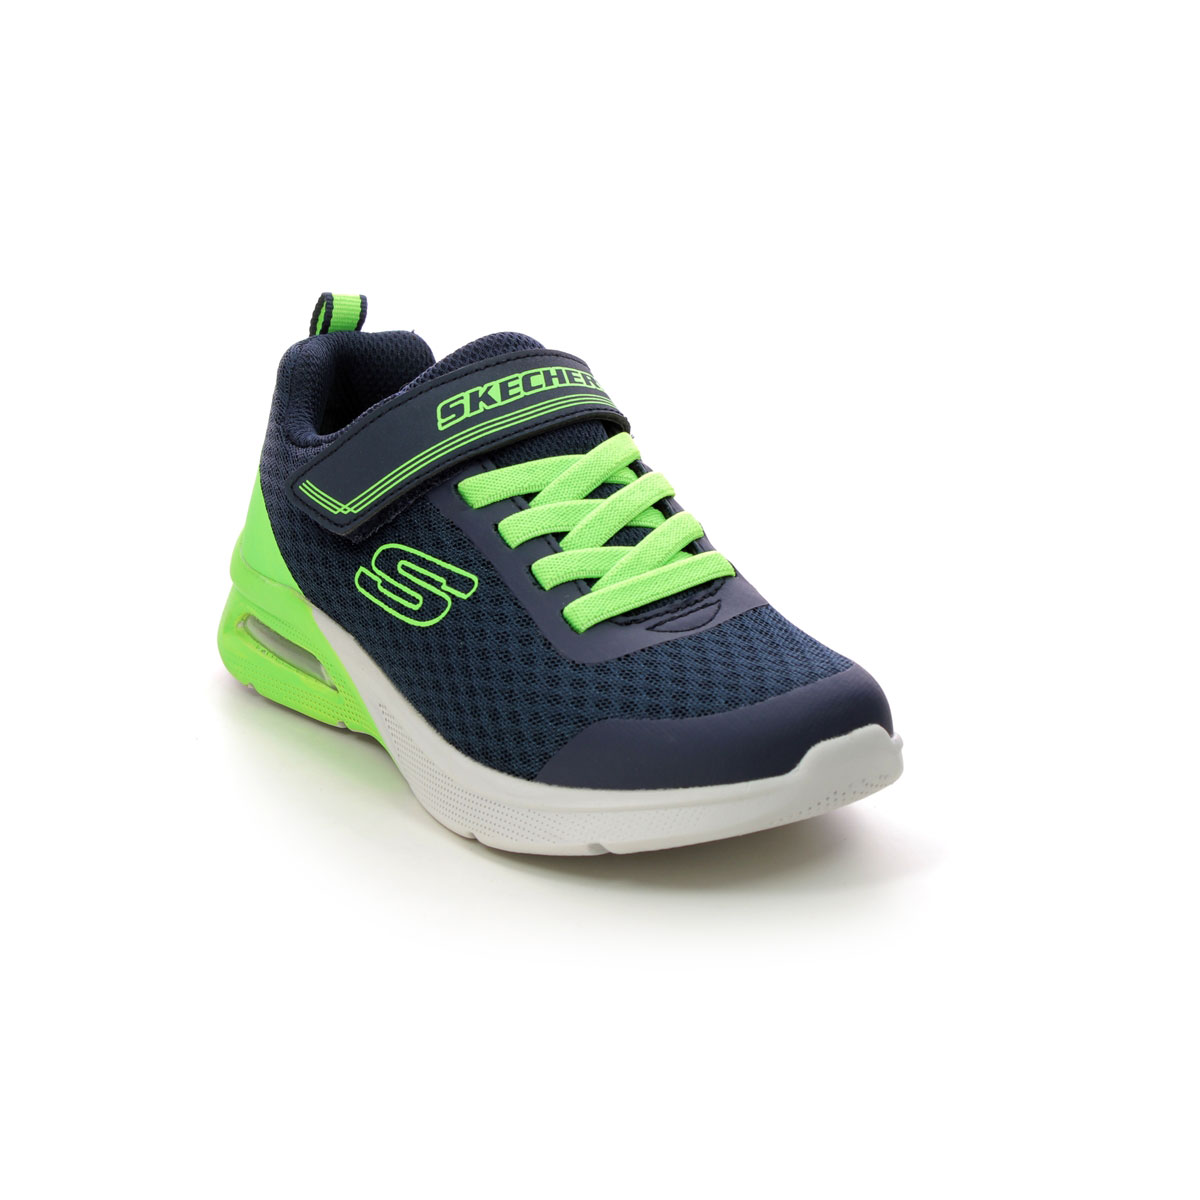 Skechers Microspec Max Navy Lime Kids Trainers 403773L In Size 27 In Plain Navy Lime For kids